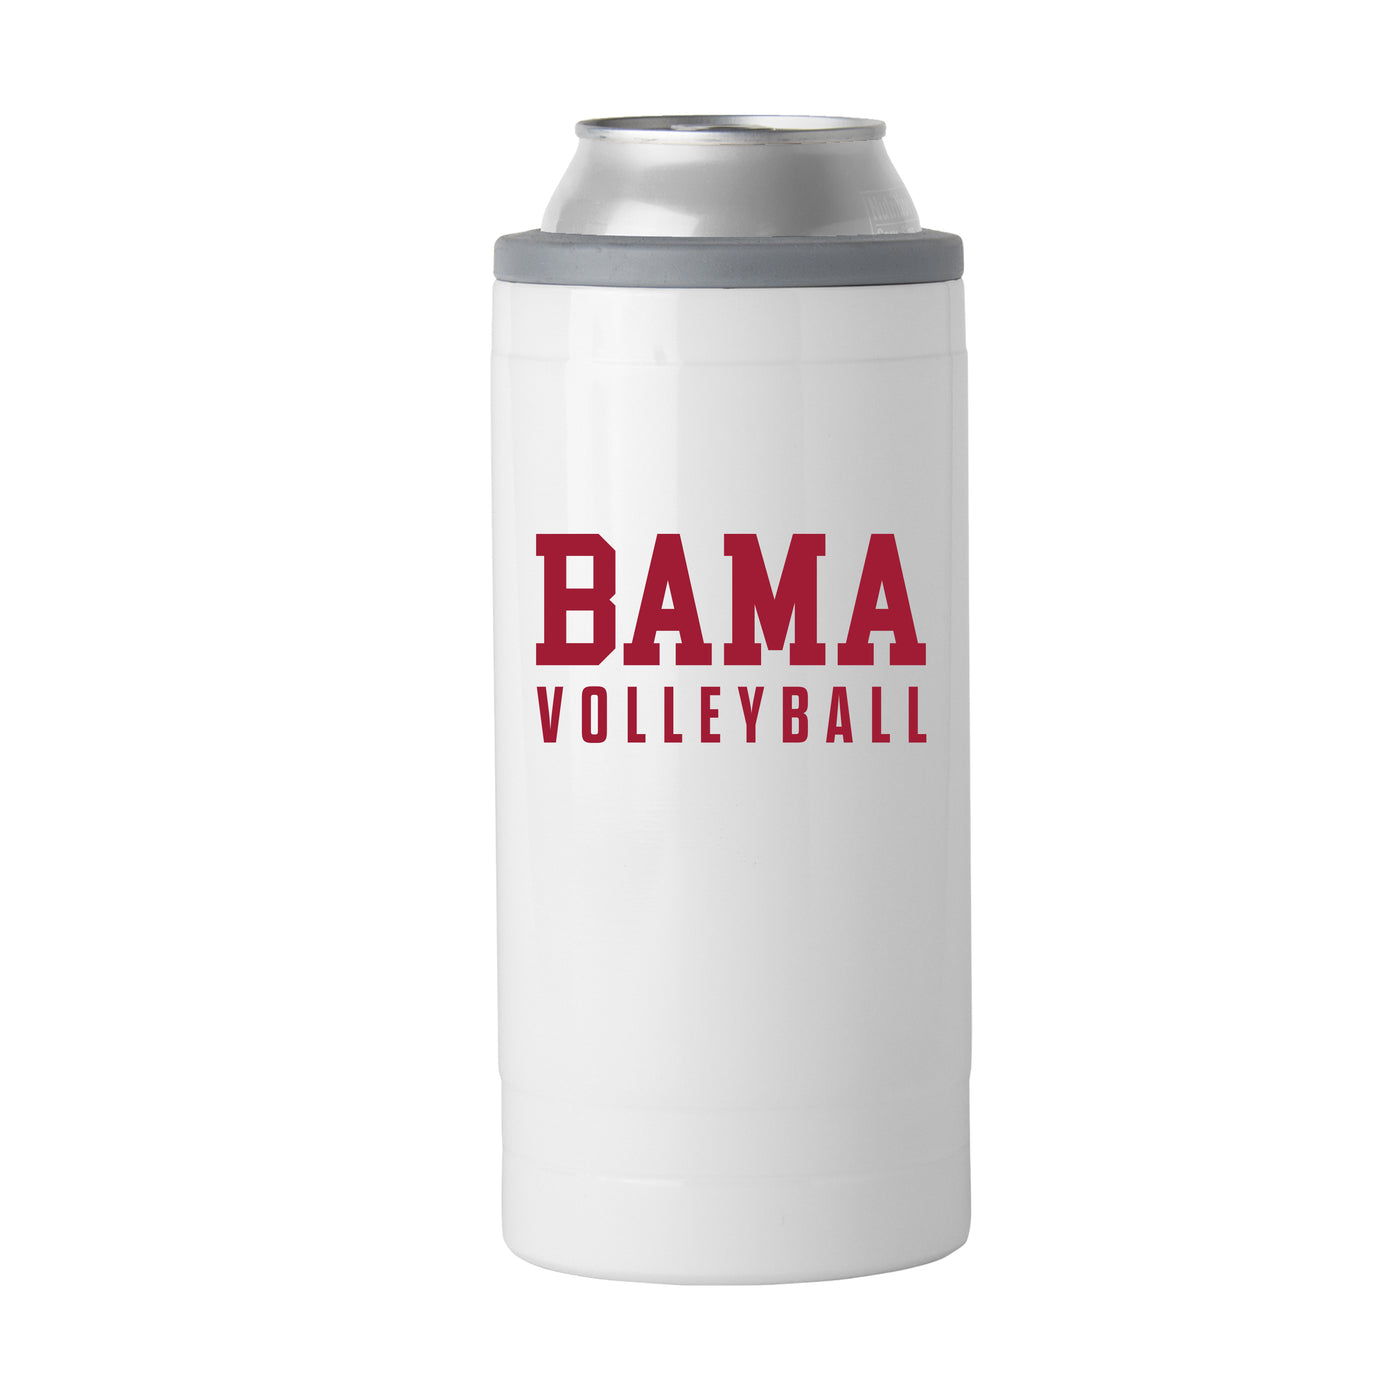 Alabama Volleyball 12oz Slim Can Coolie